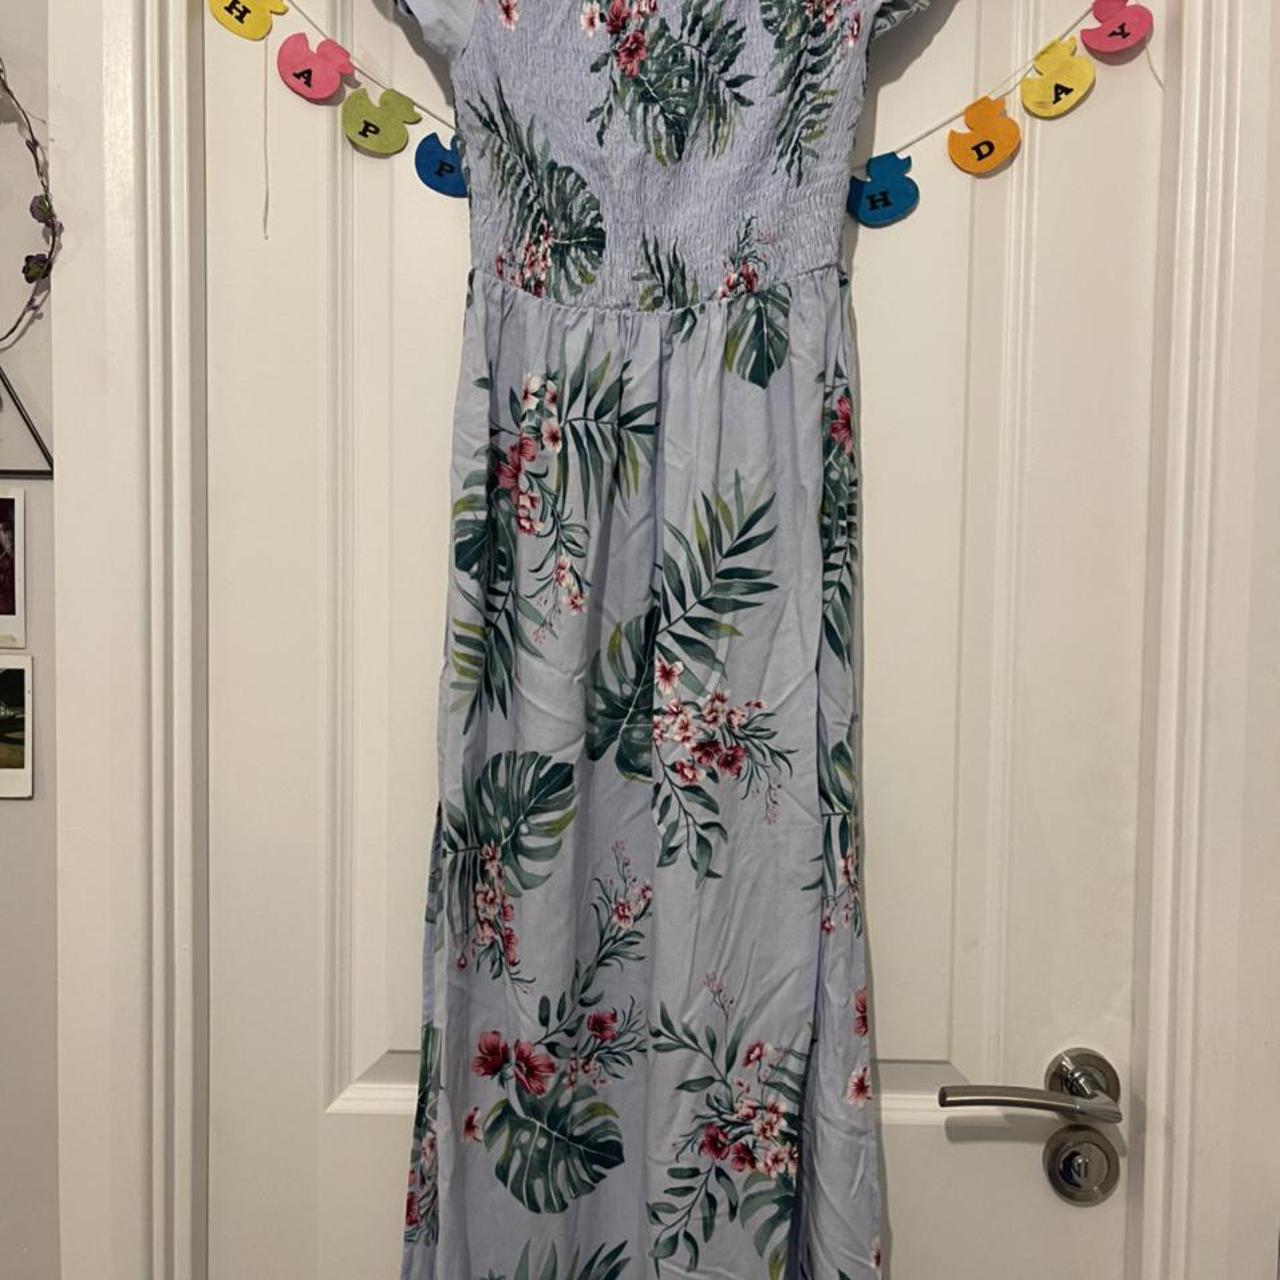 New look 915 generation maxi dress. Bought years... - Depop